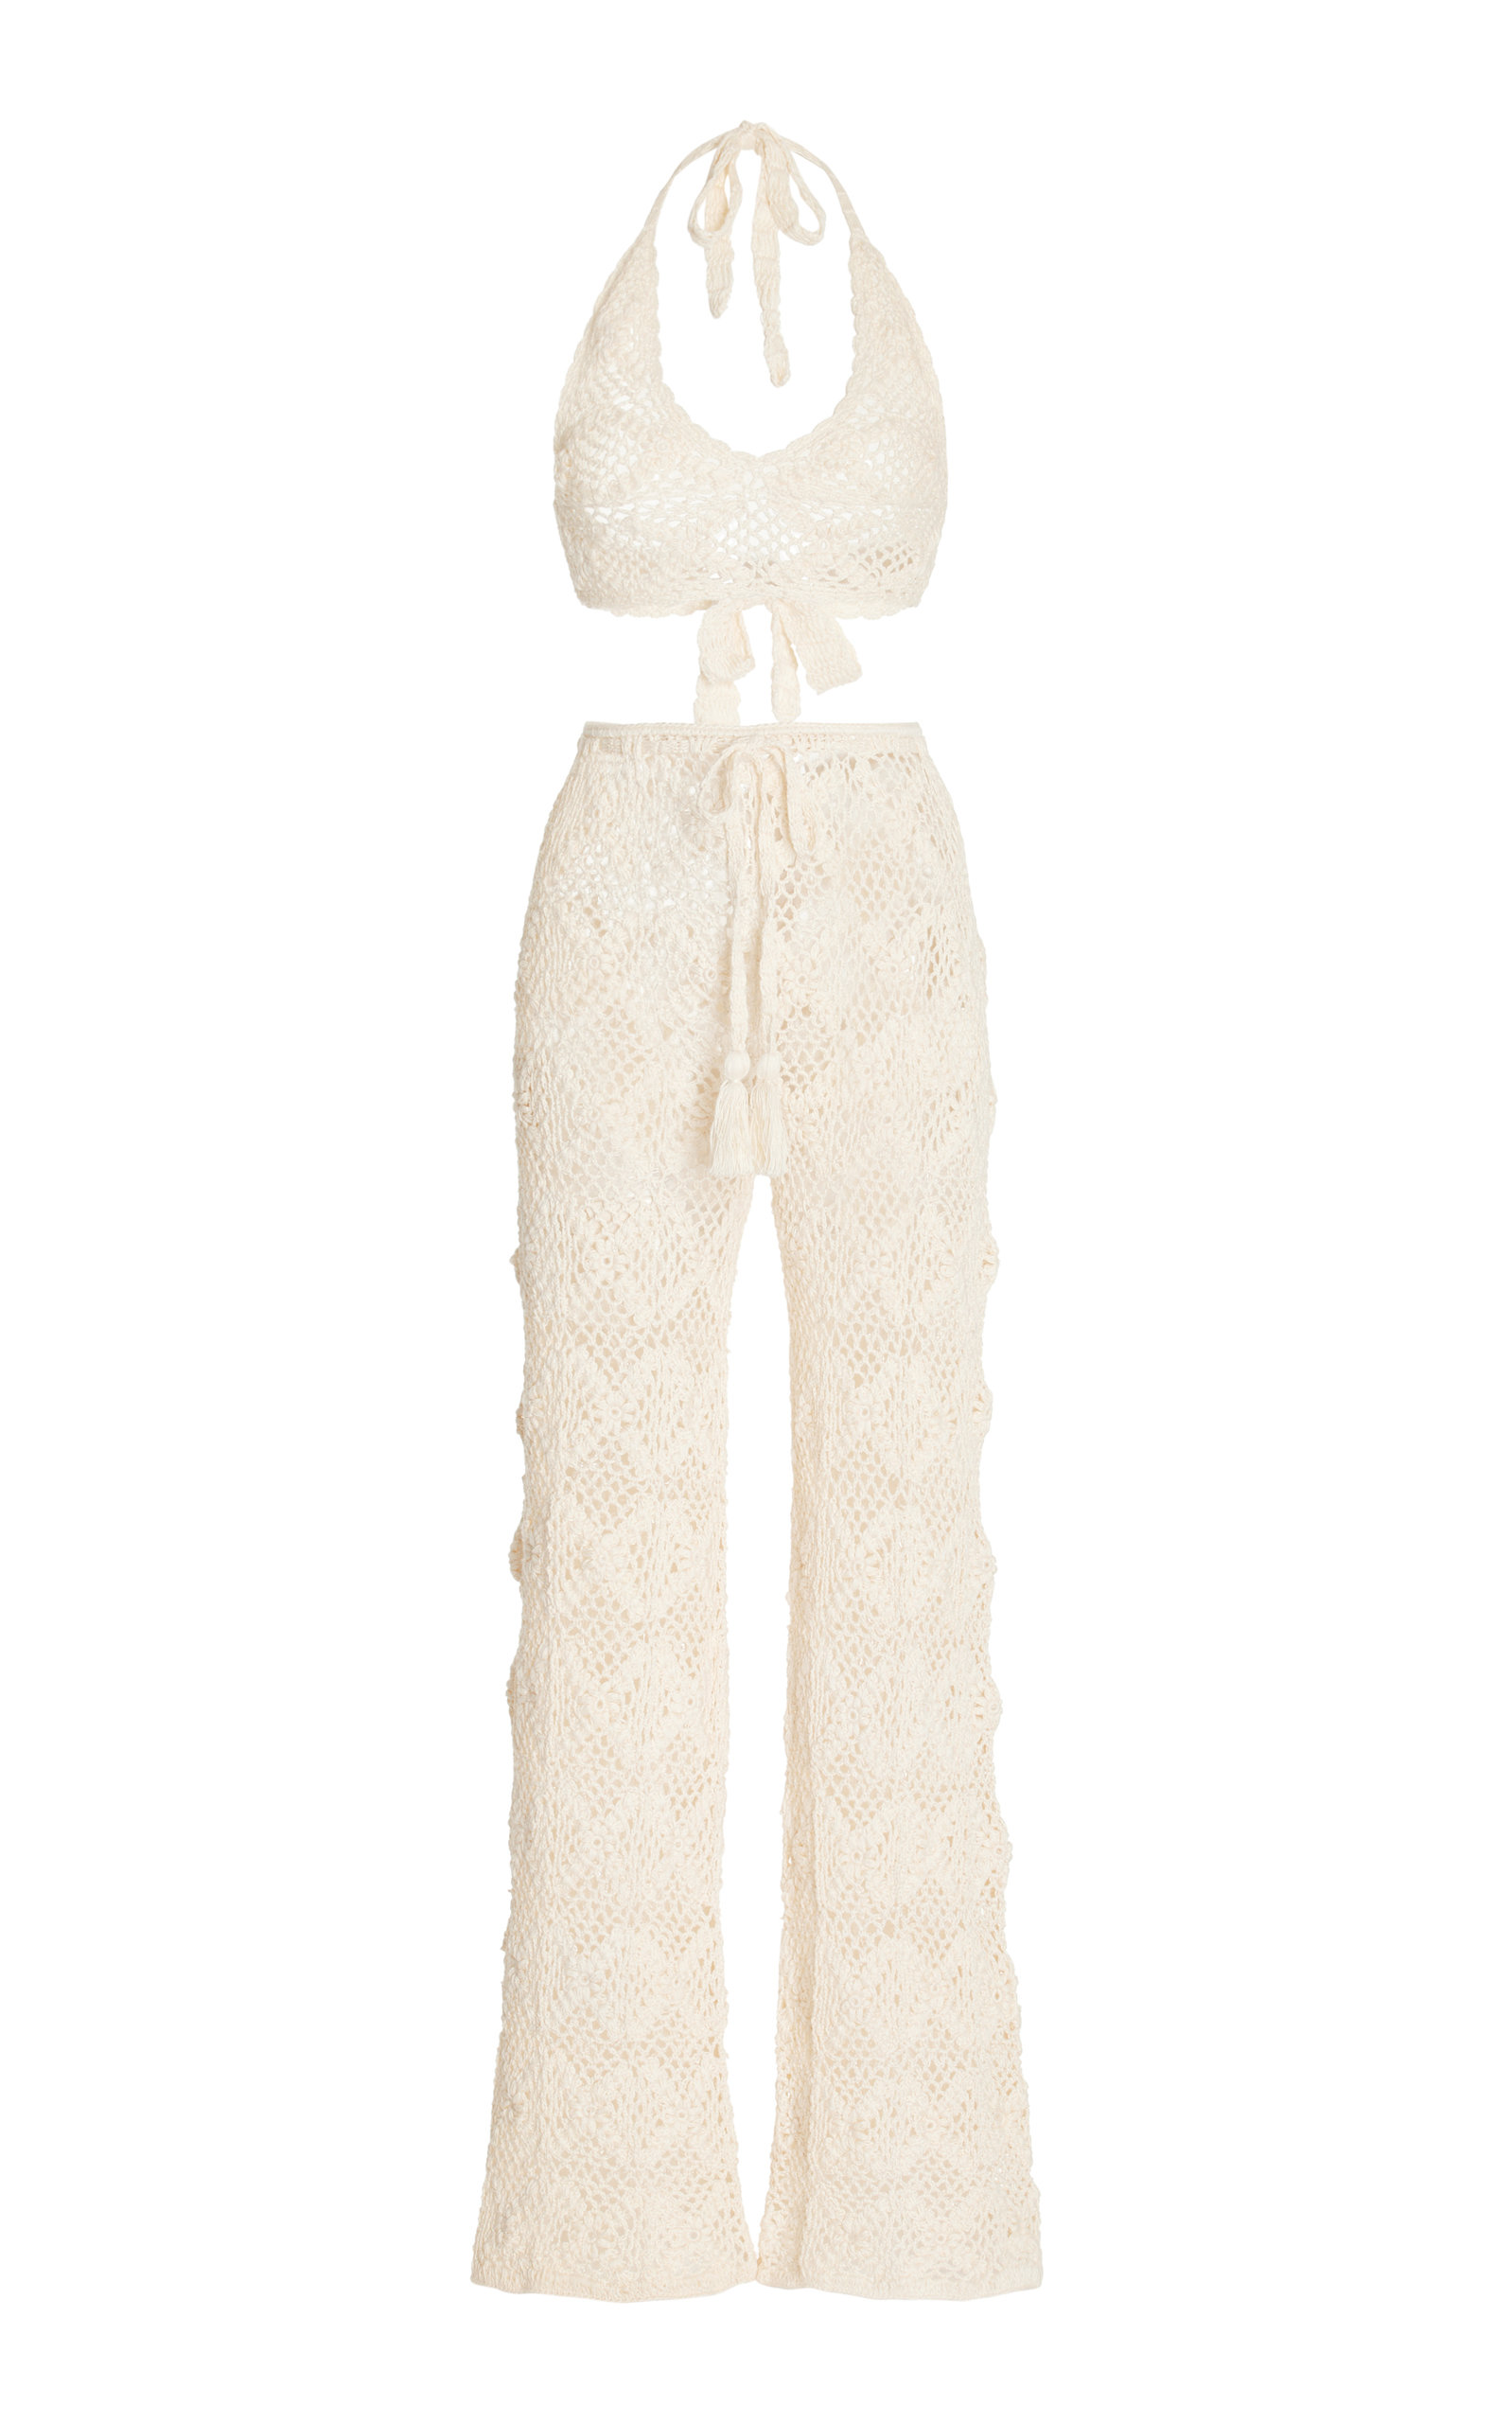 Akoia Swim Daisy Crocheted Cotton Pants And Top Set In White